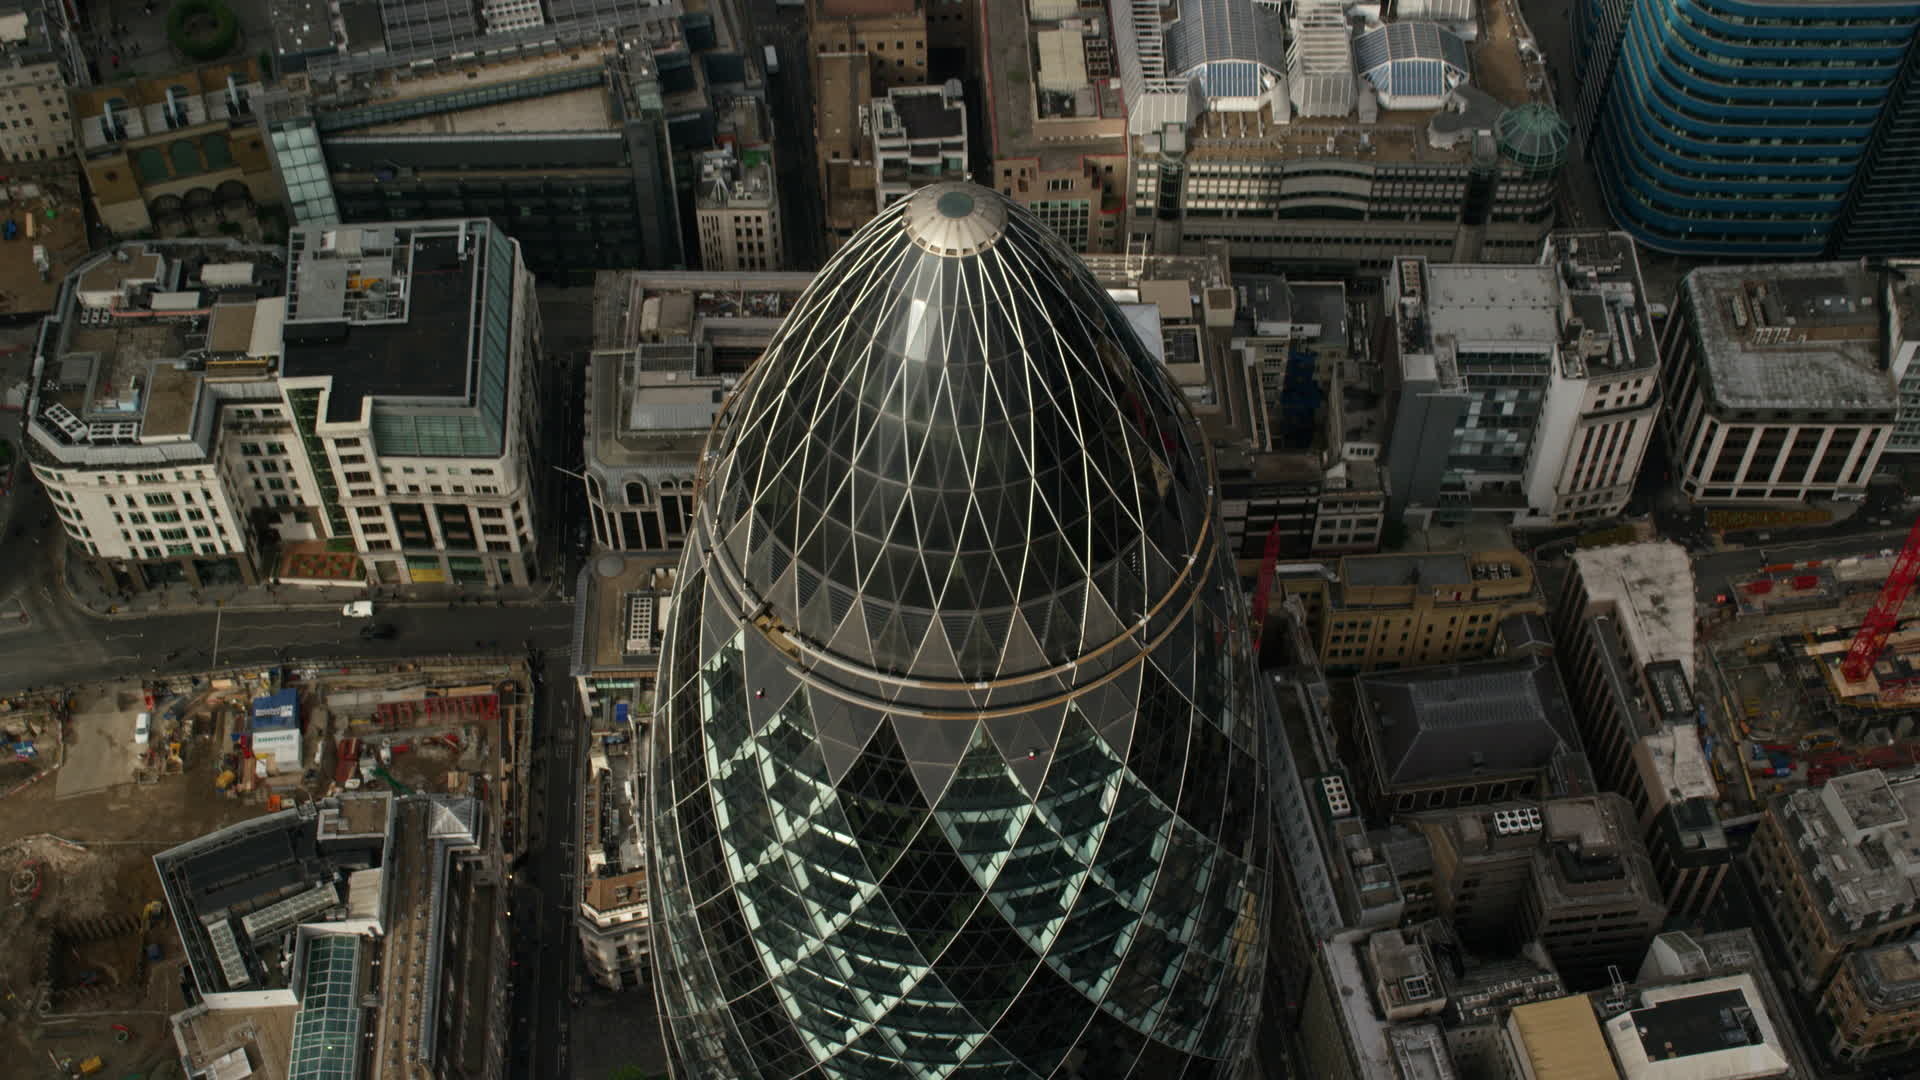 The Gherkin, London wallpapers, High-quality images, Christopher Sellers, 1920x1080 Full HD Desktop